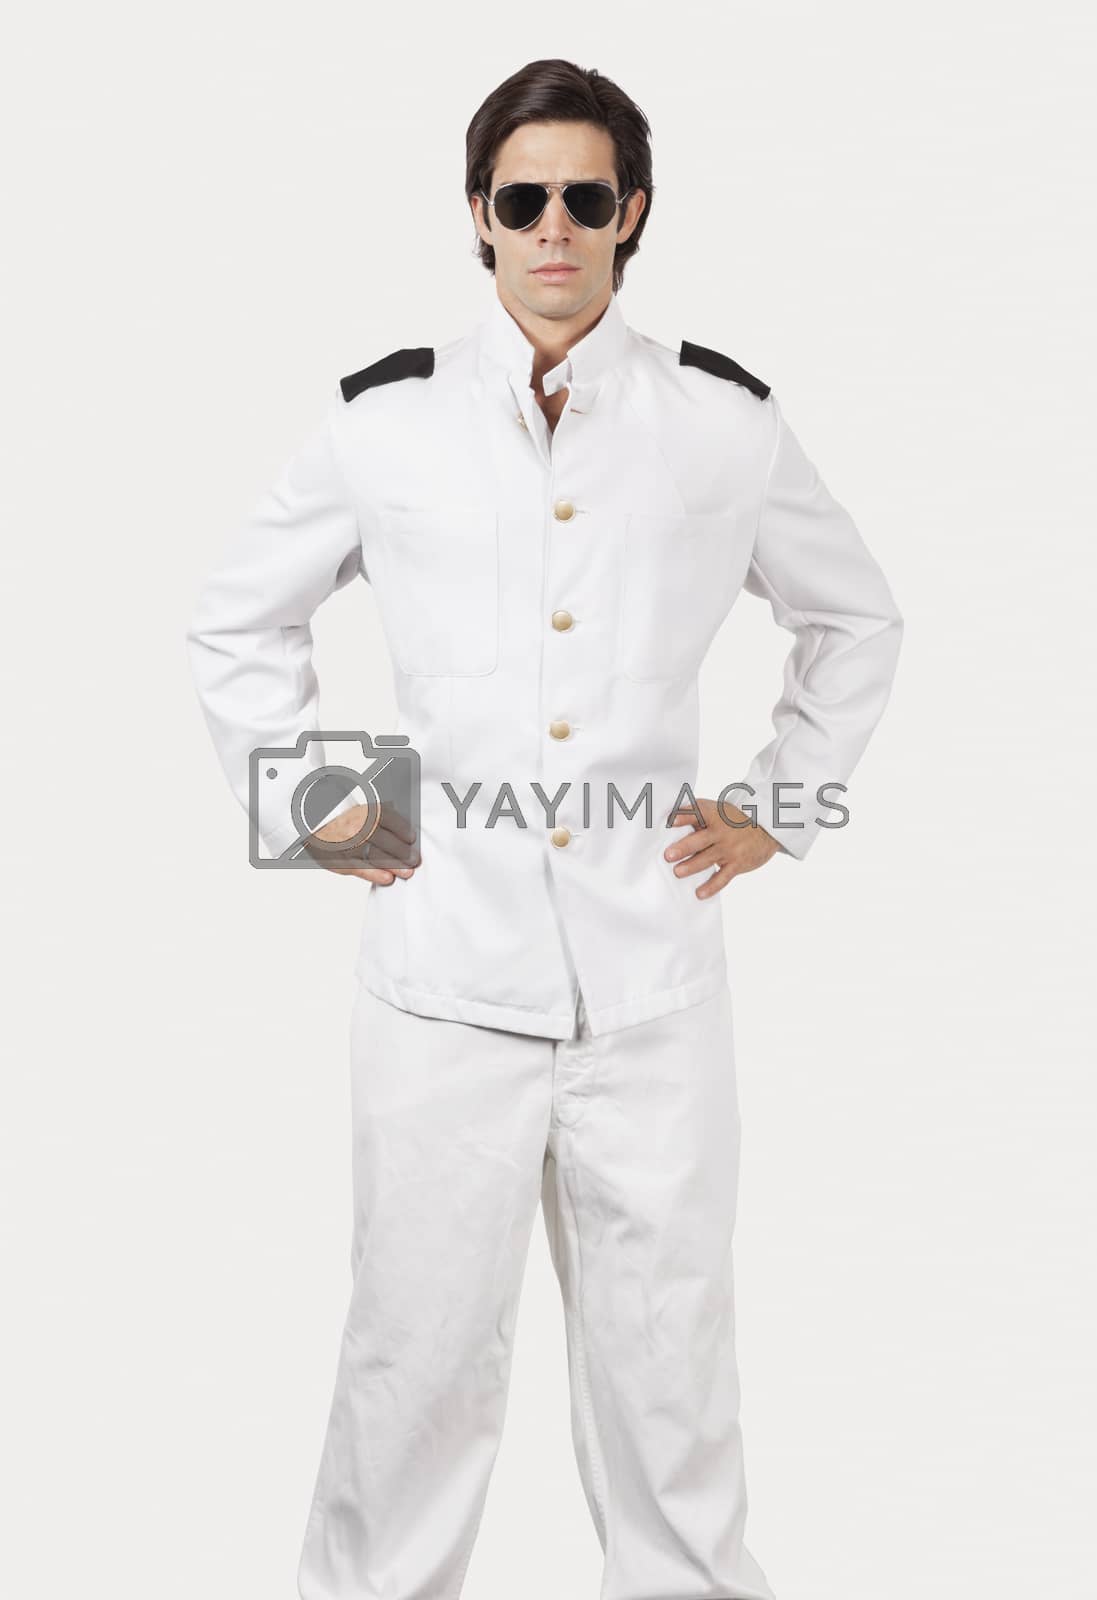 Royalty free image of Portrait of young navy officer standing against gray background by moodboard